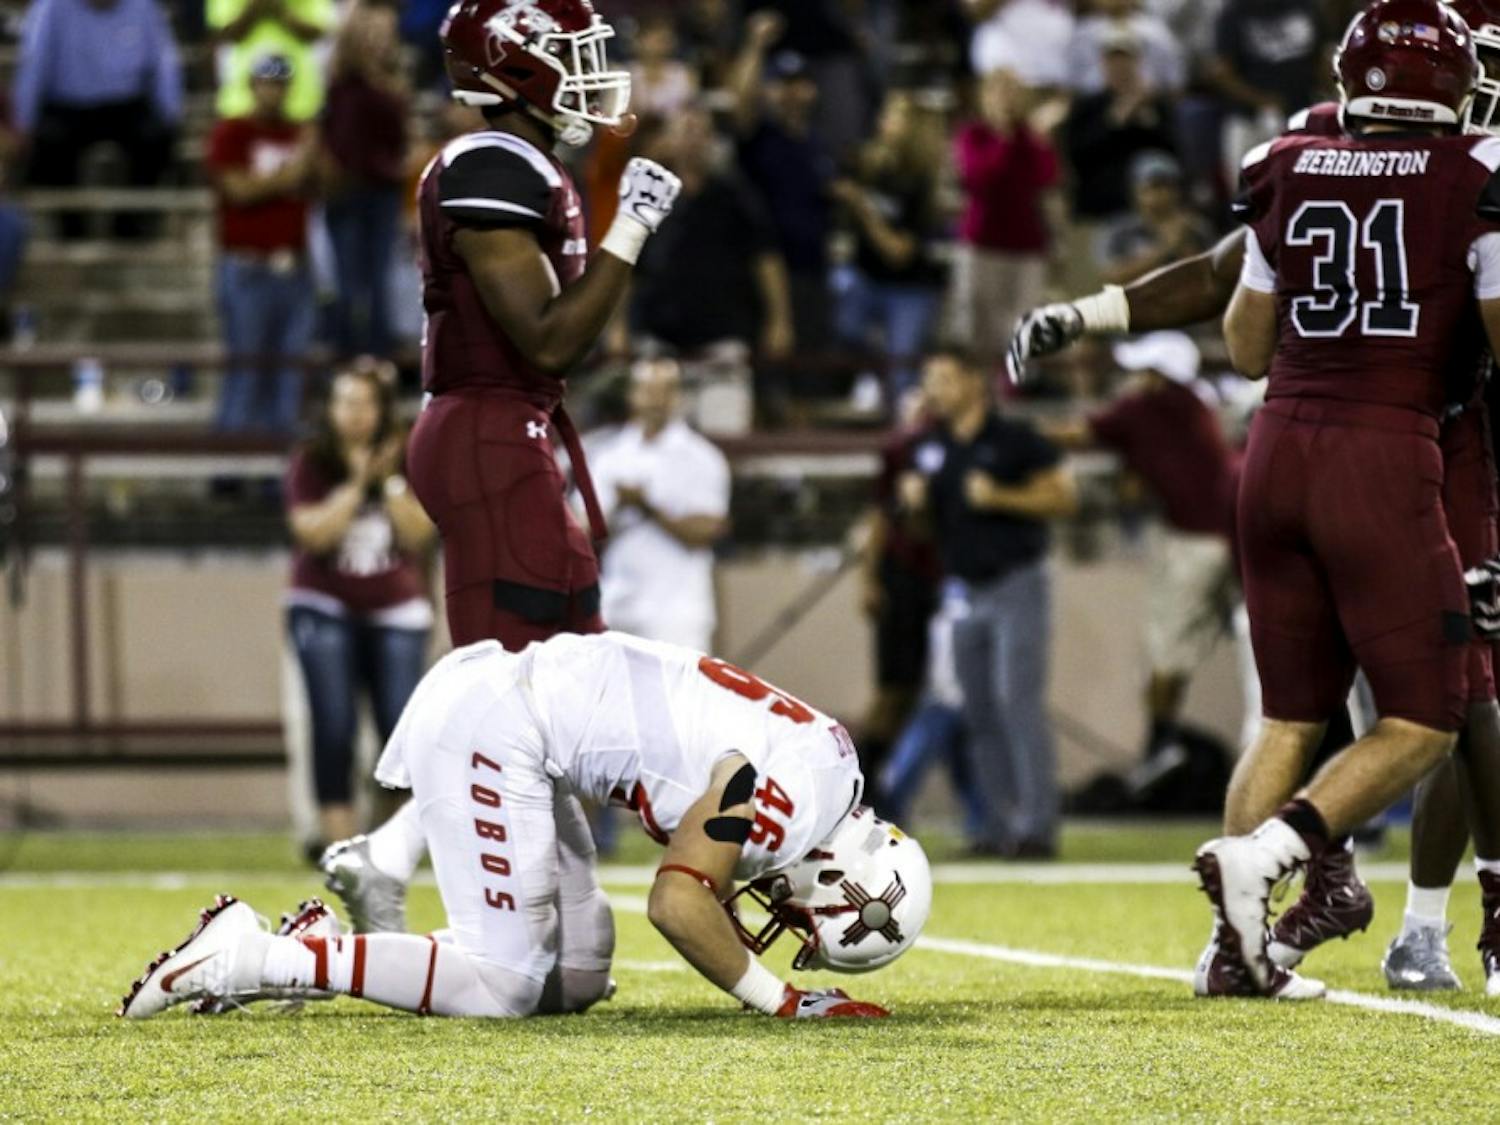 Senior line backer Dakota Cox hits the turf&nbsp;as NMSU players celebrate around him Saturday, Sept. 10, 2016 in Las Cruces, New Mexico.&nbsp;The Lobos lost to the Aggies for the first time&nbsp;since 2011 by a score of 32-31.&nbsp;&nbsp;